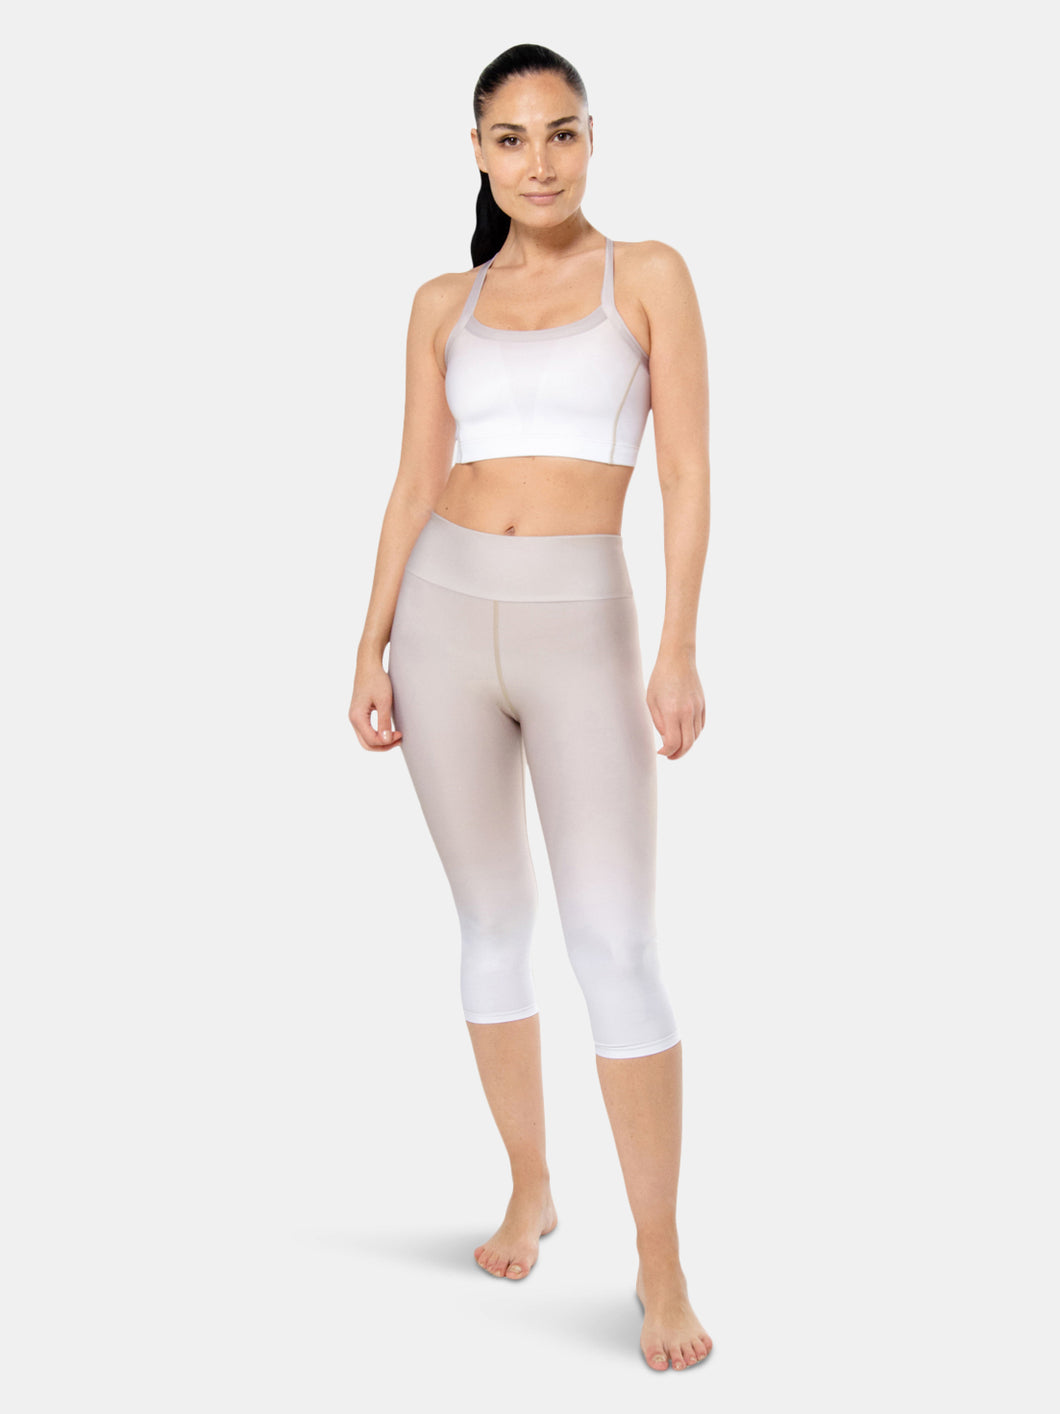 Corda And White Leggings 3/4 With Shades Print